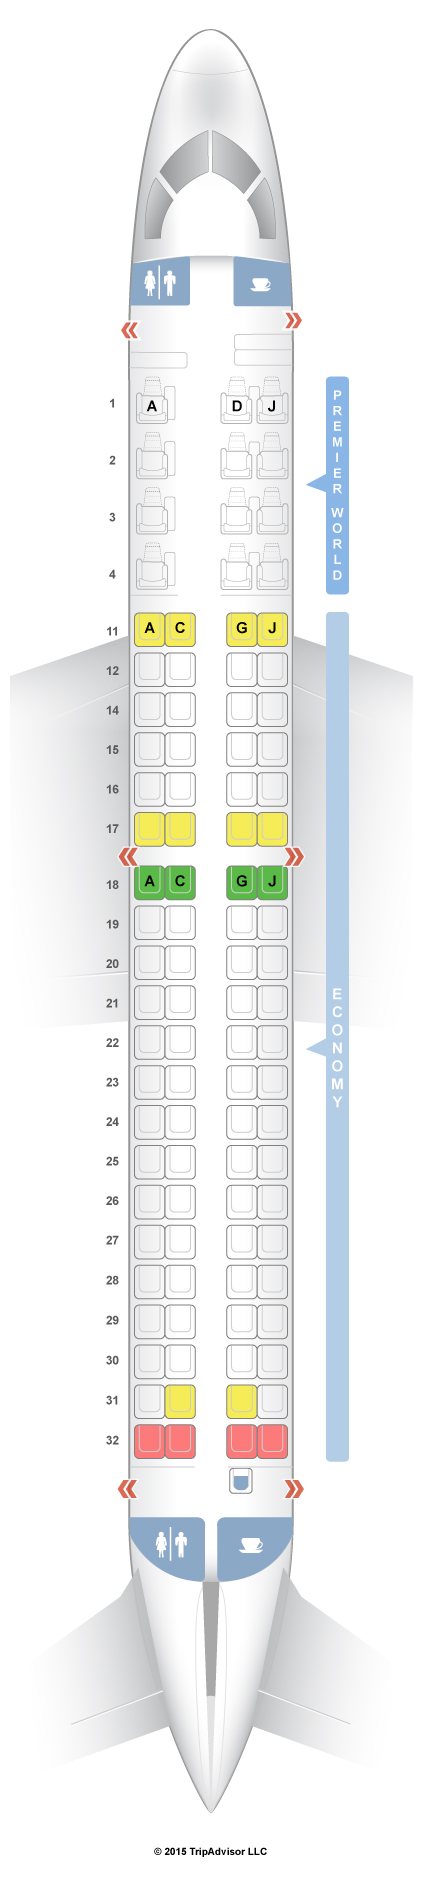 Embraer E90 Seating Chart